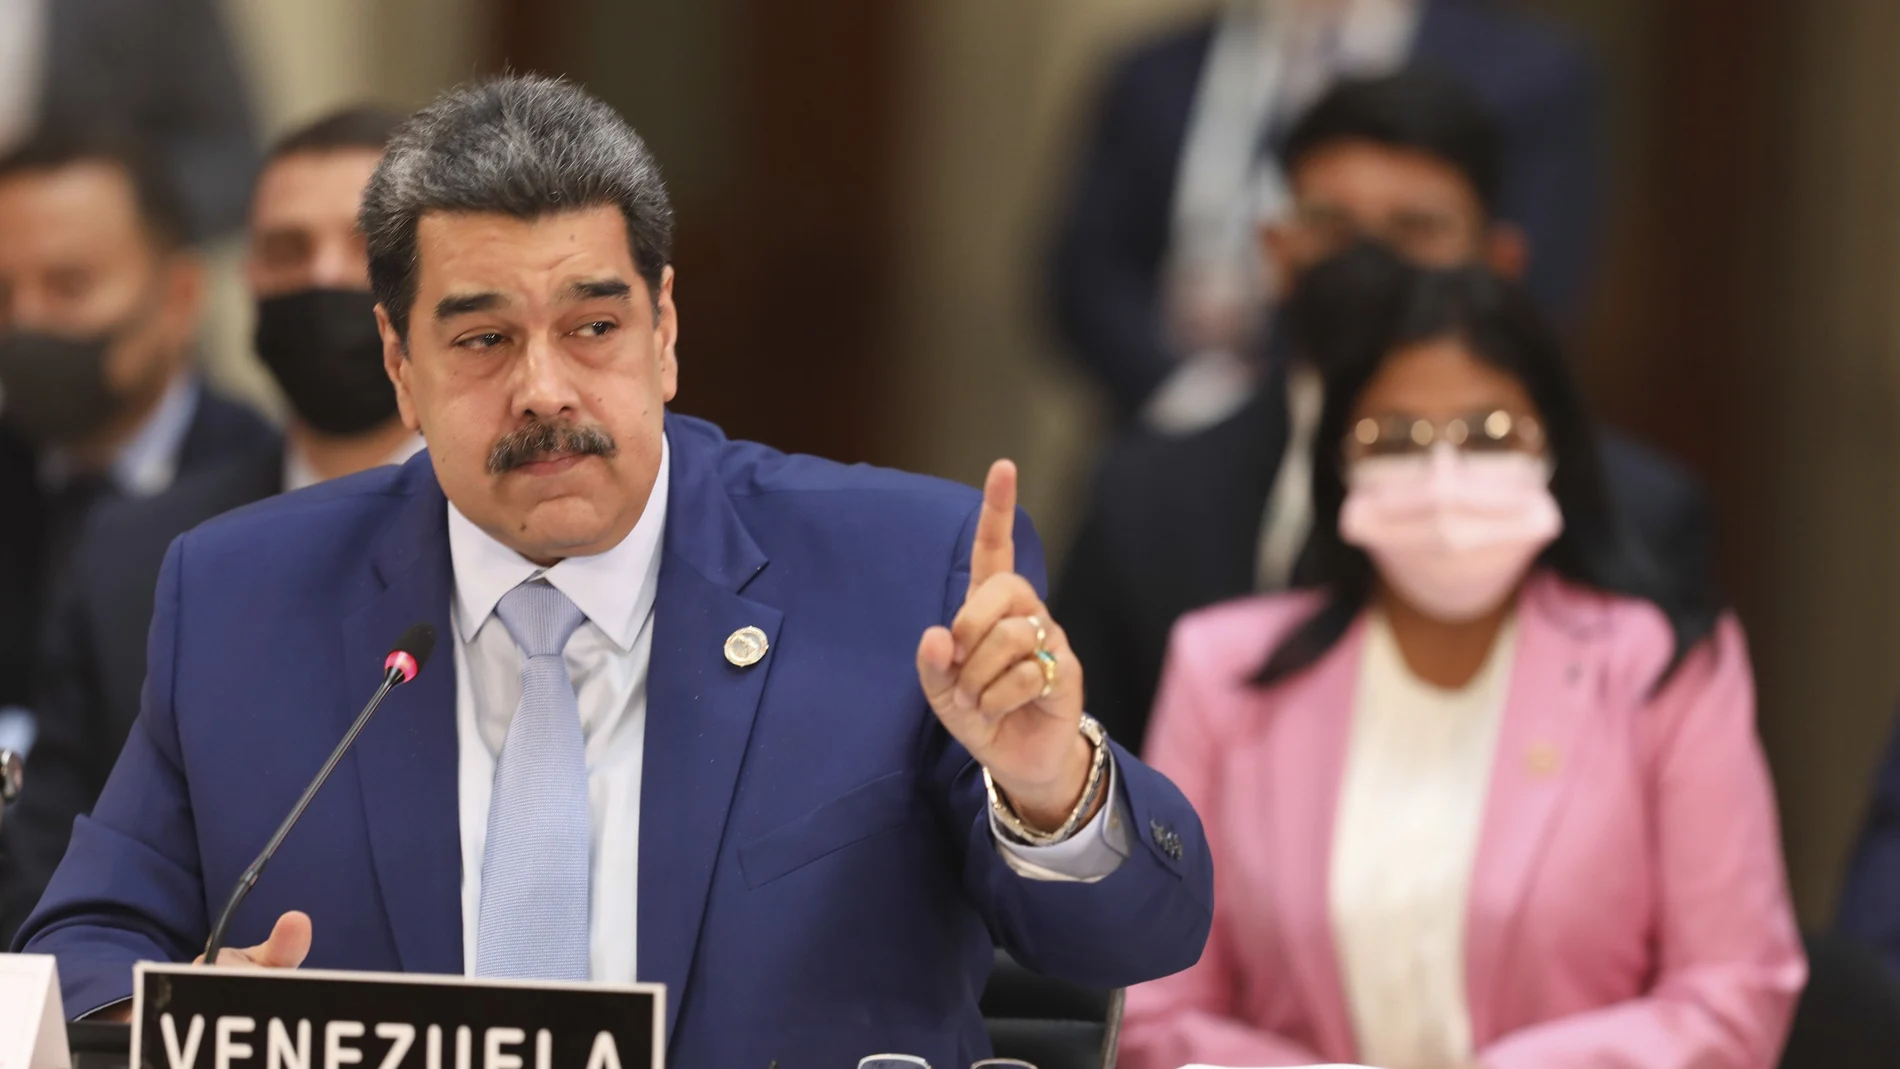 In this handout photo provided by the Miraflores Press Office, Venezuela's President Nicolas Maduro speaks at theÂ Community of Latin American and Caribbean States, or CELAC summit, in Mexico City, Saturday, Sept. 18, 2021. (Miraflores Press Office via AP)